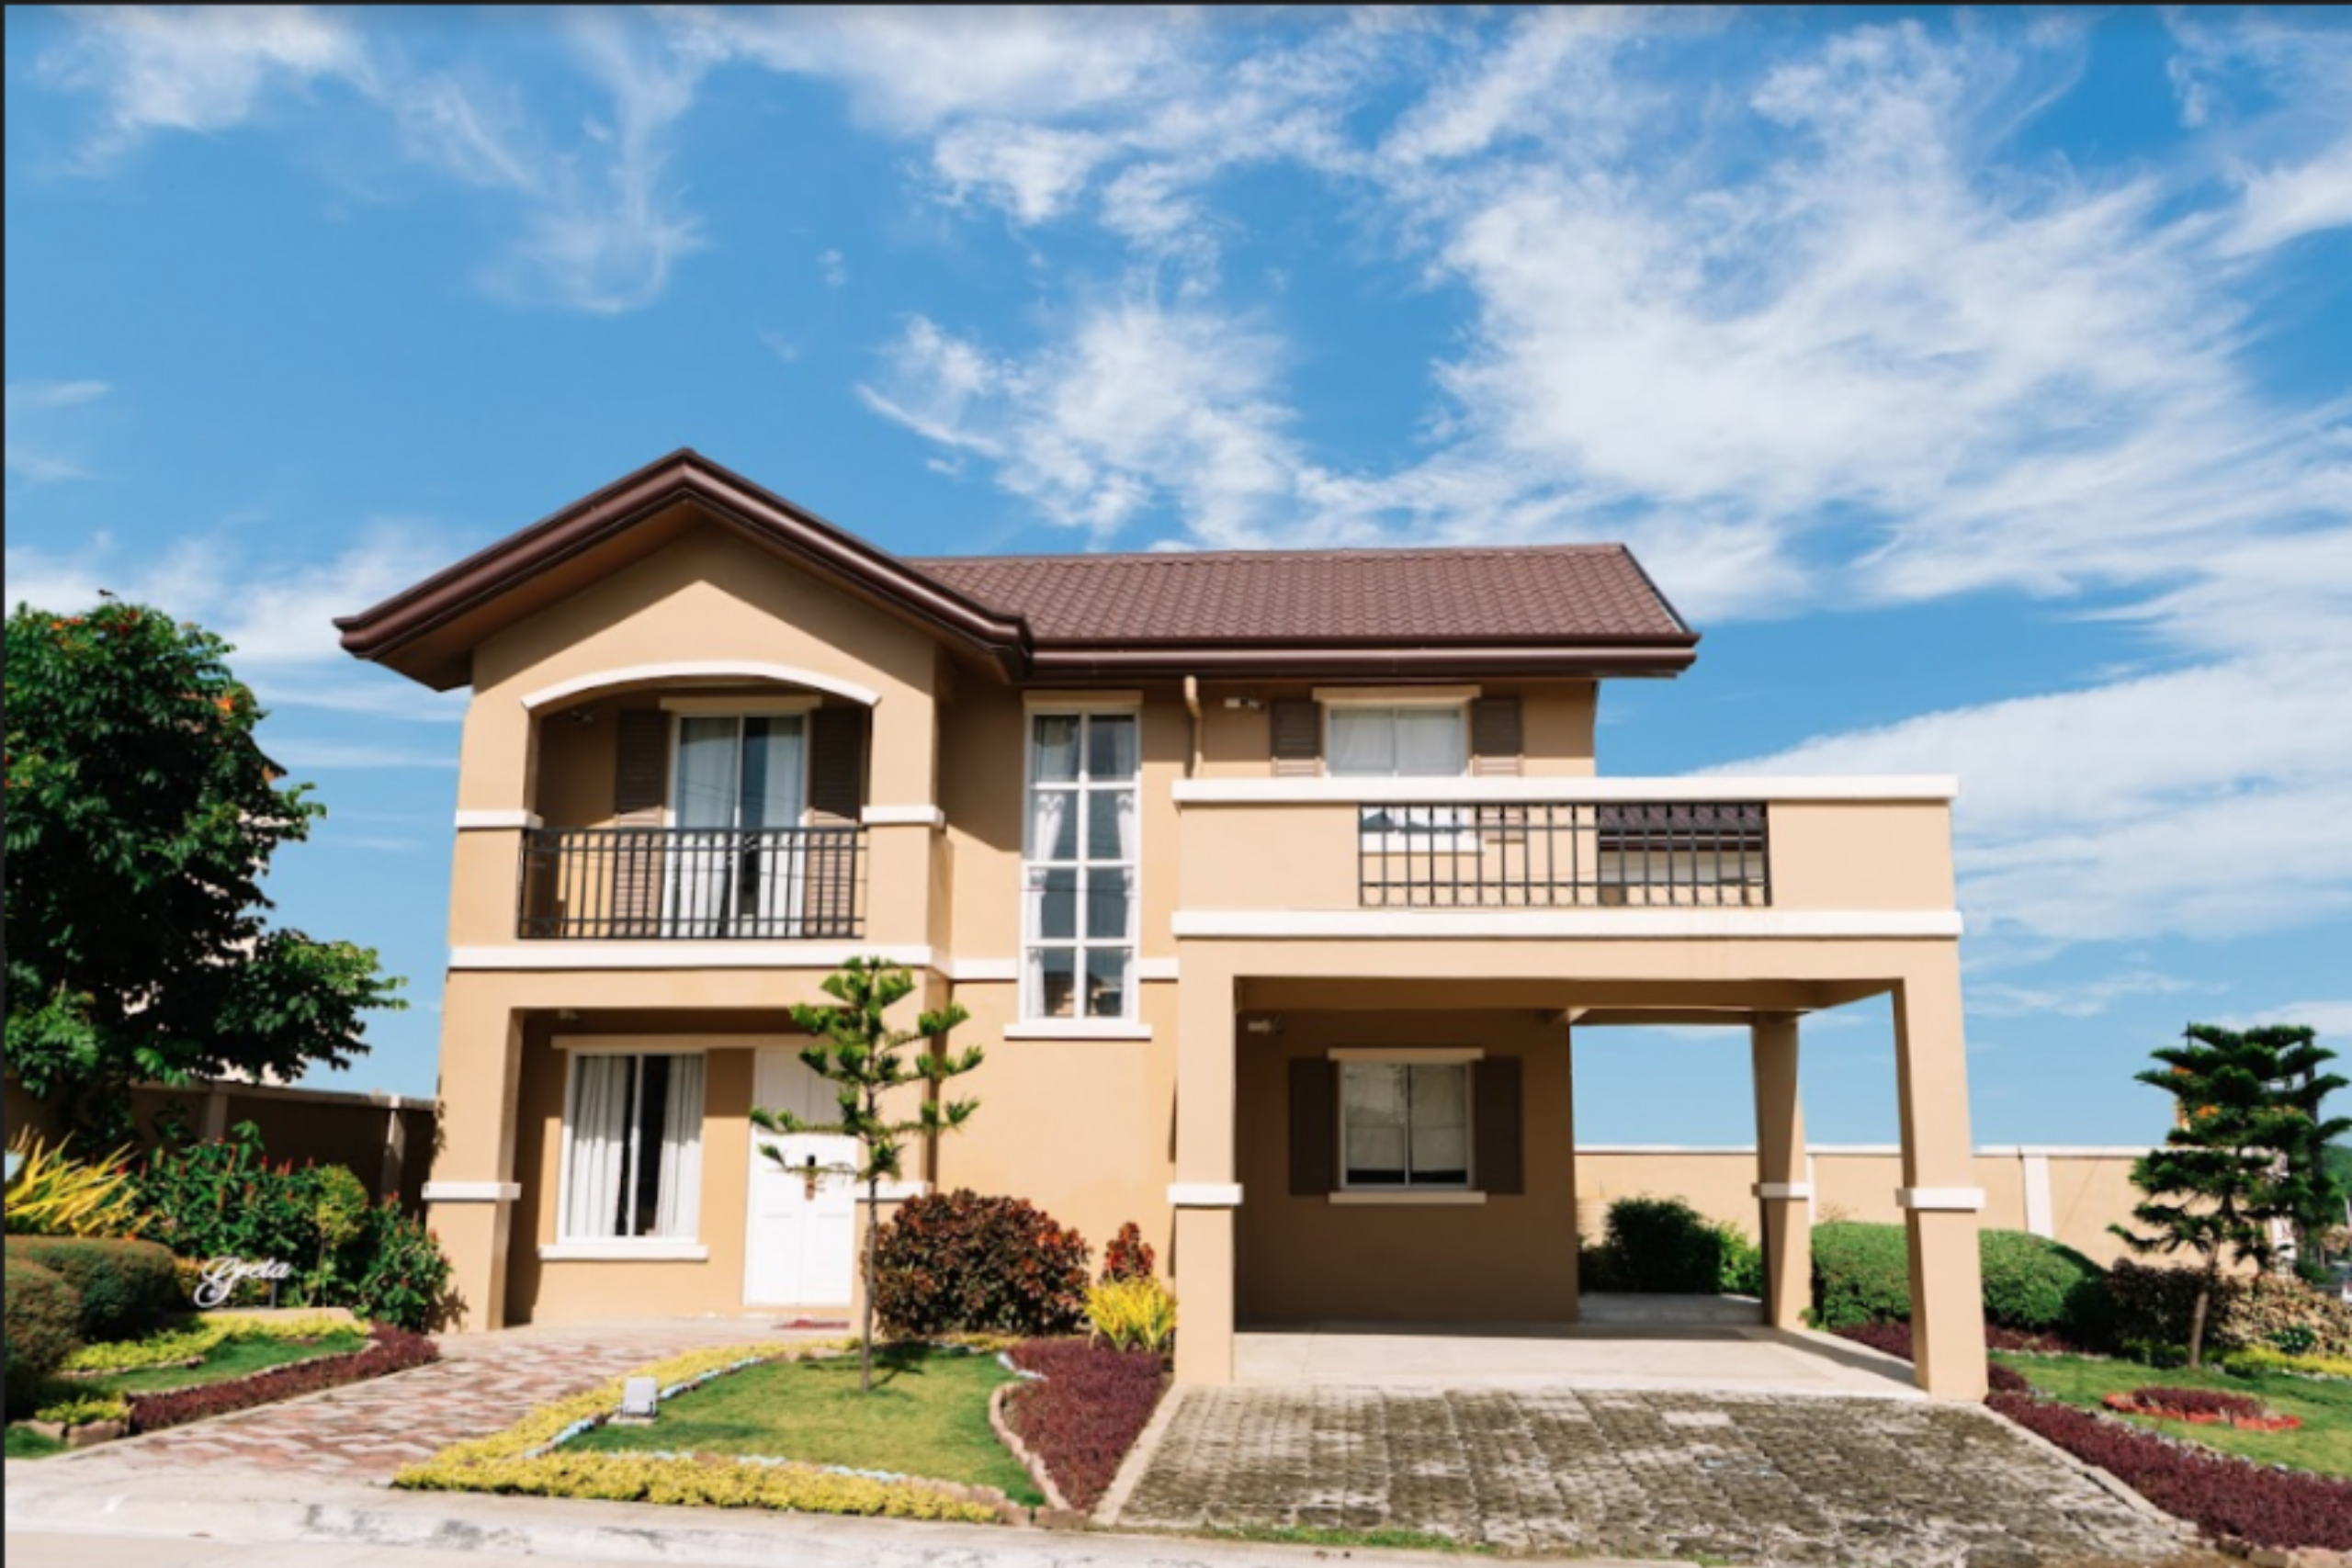 is it cheaper to build up or out?, ofw property investment philippines, ofw affordable house and lot, ofw investment